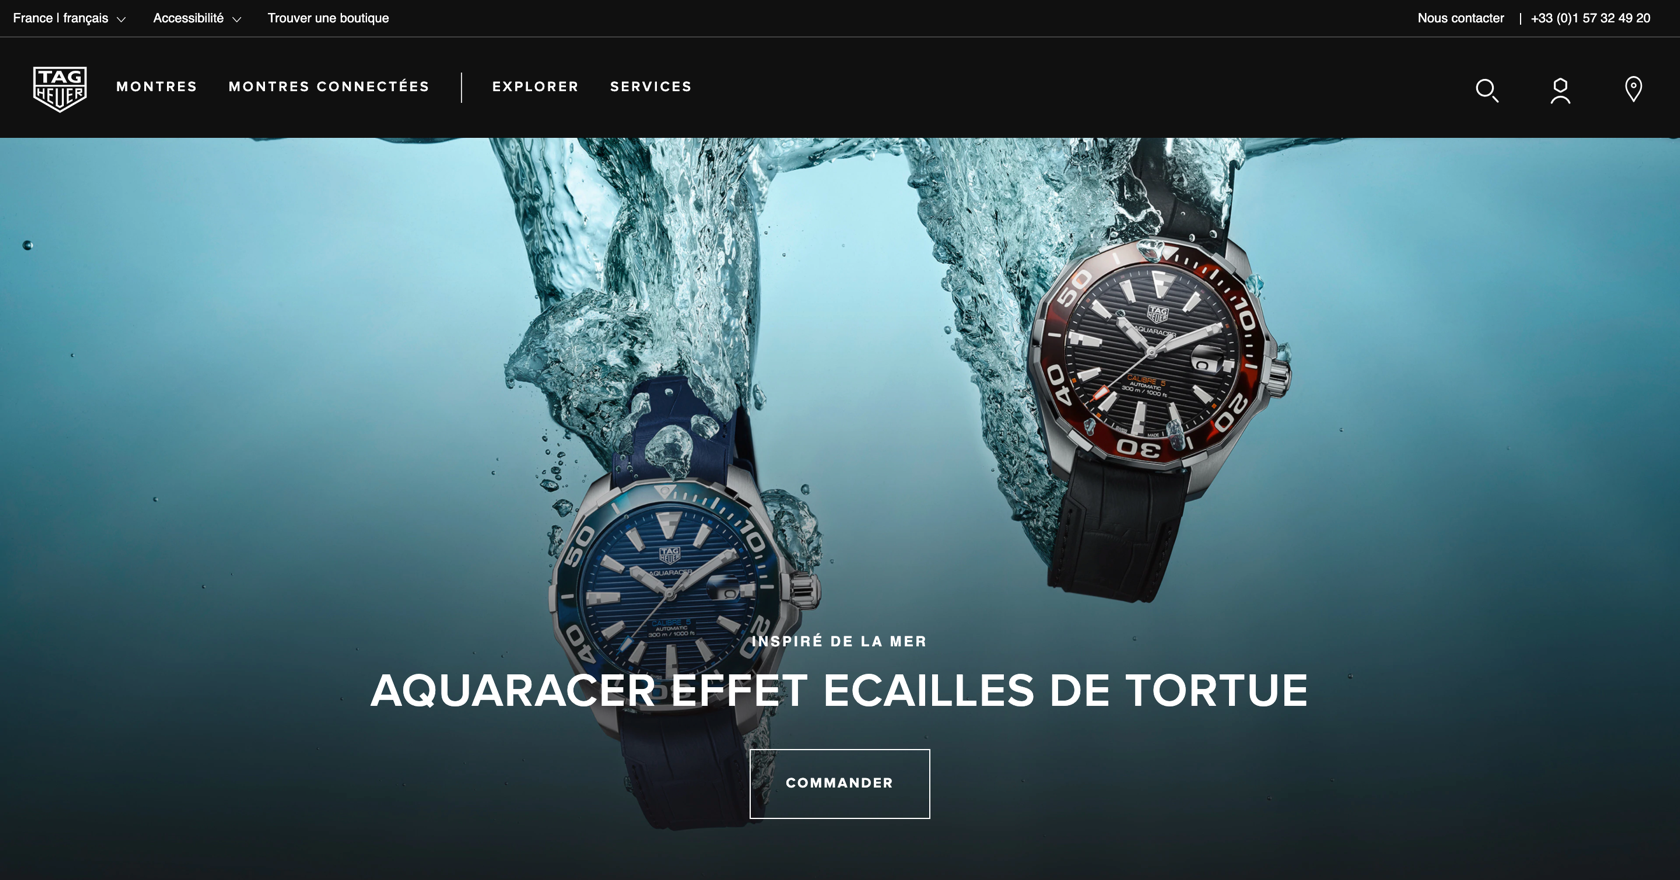 TAG Heuer cover image